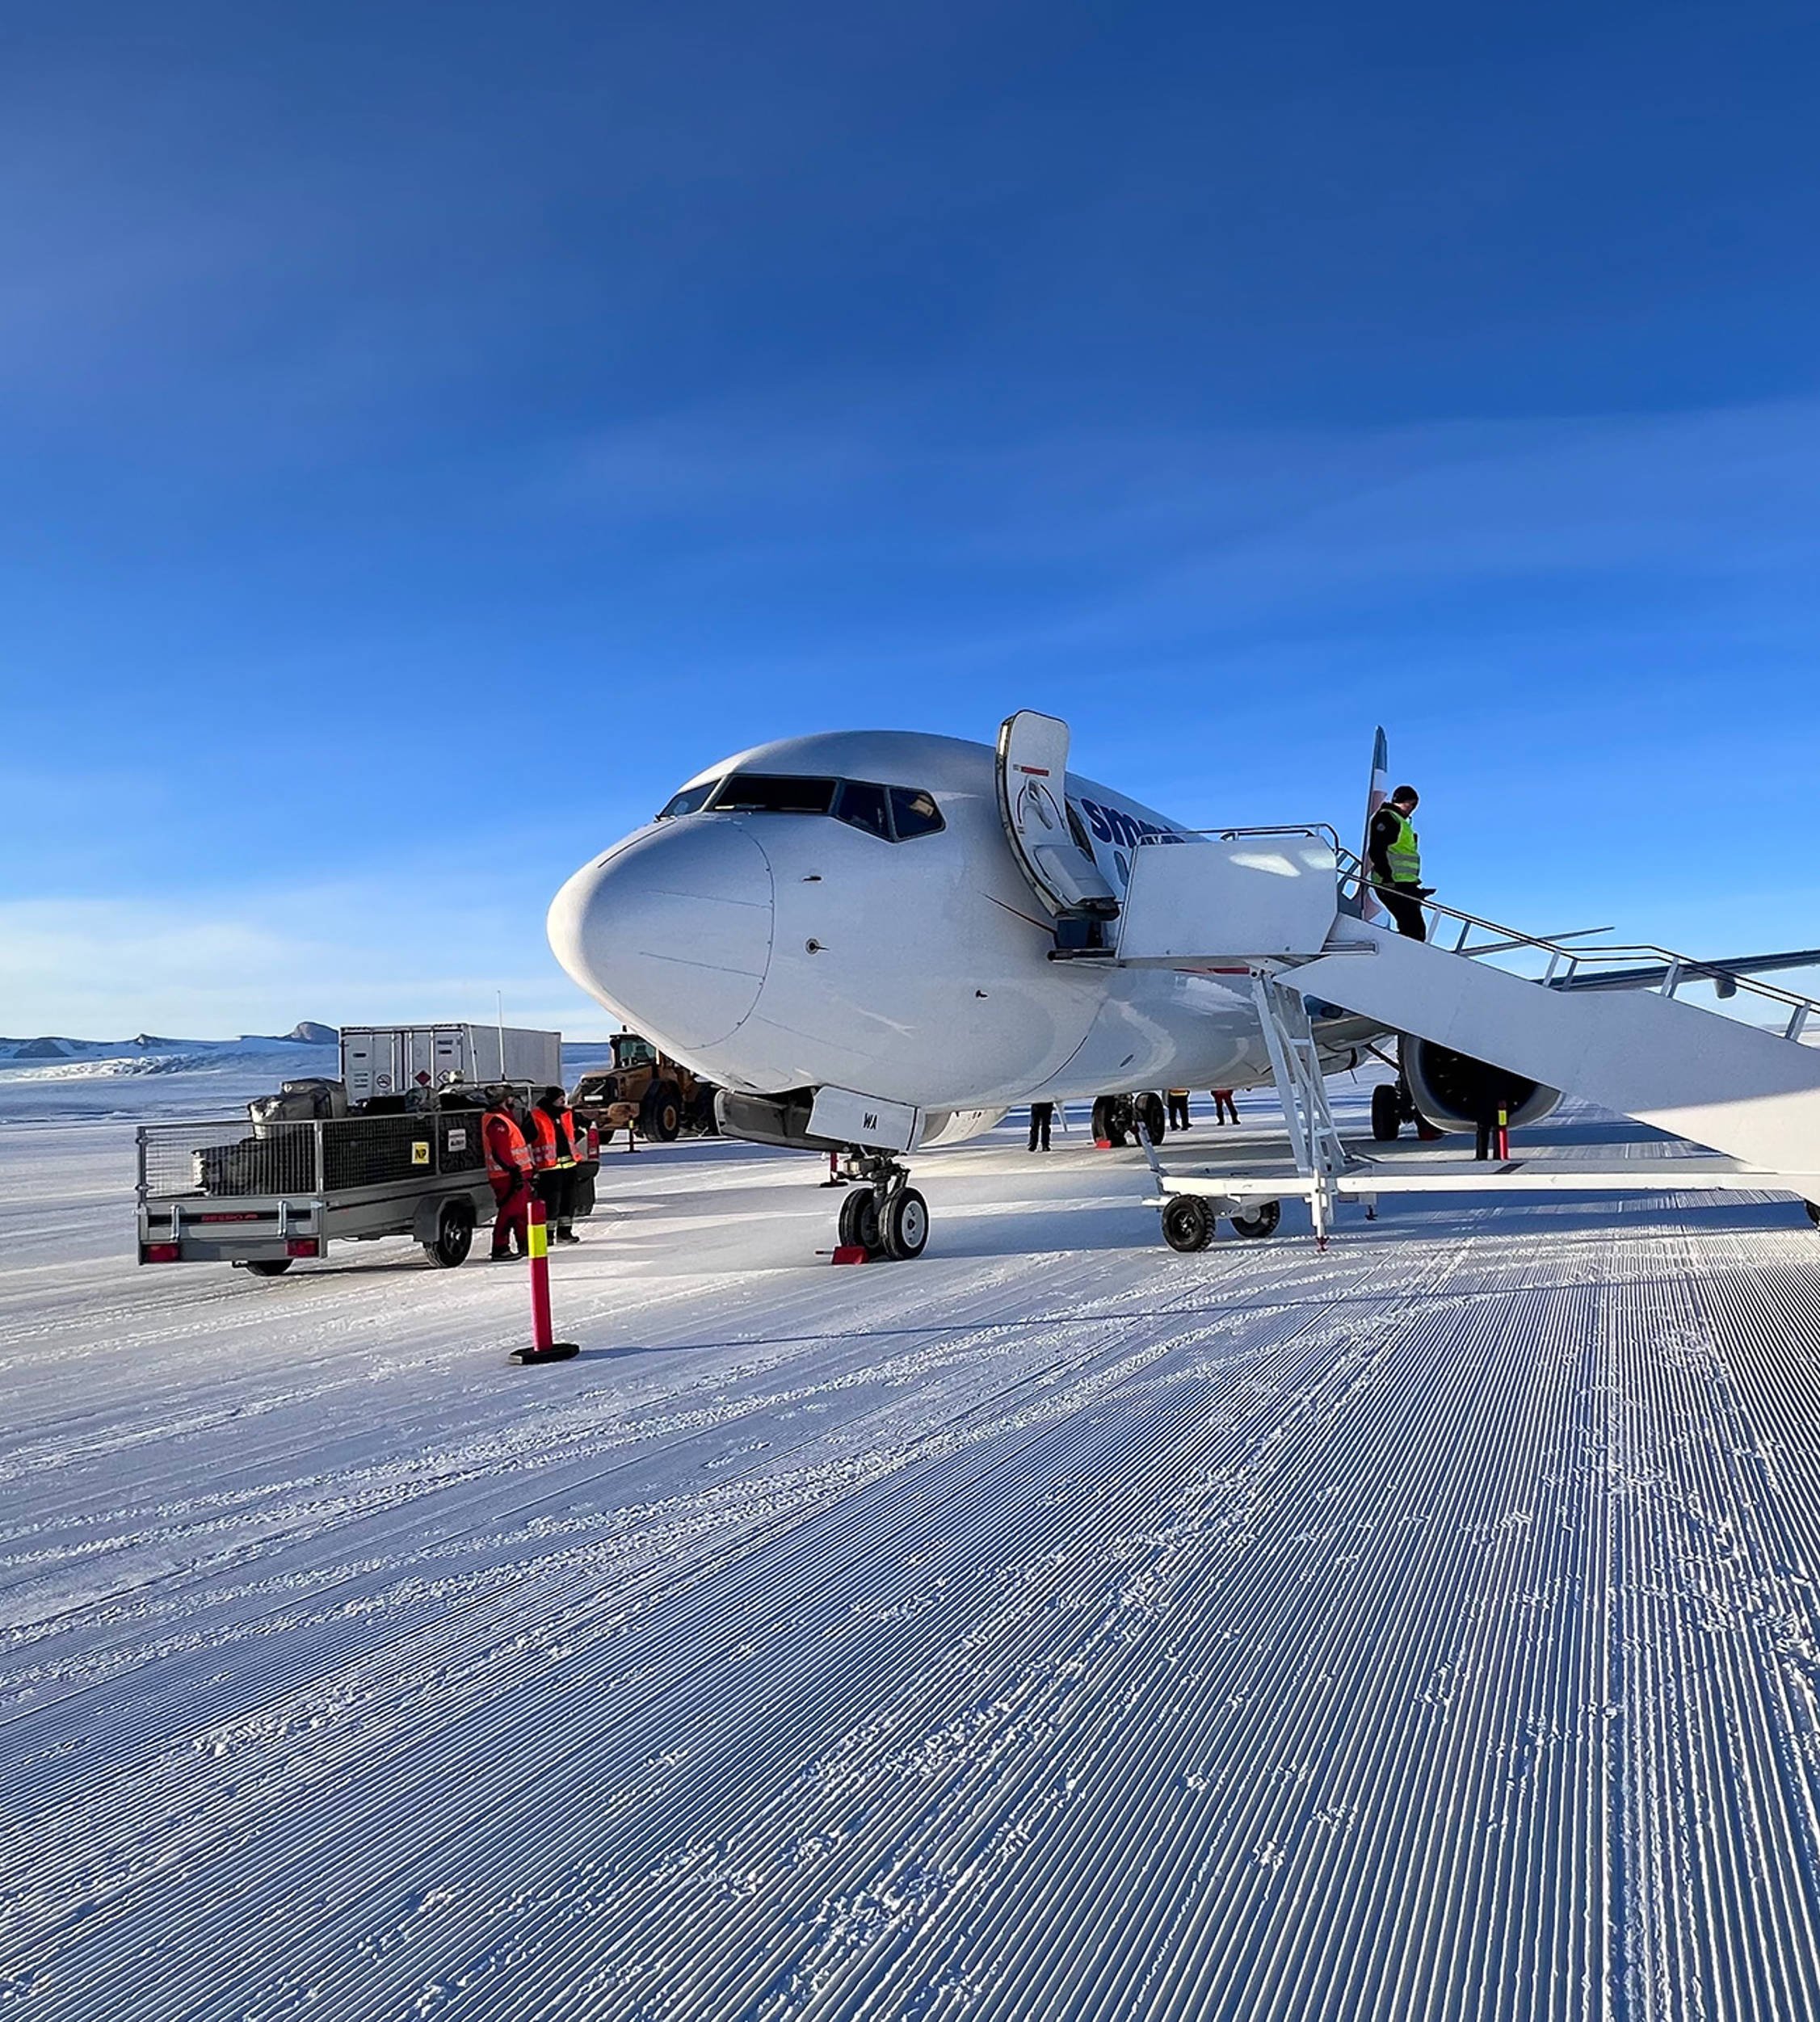 Airplane on ice in Antarctica